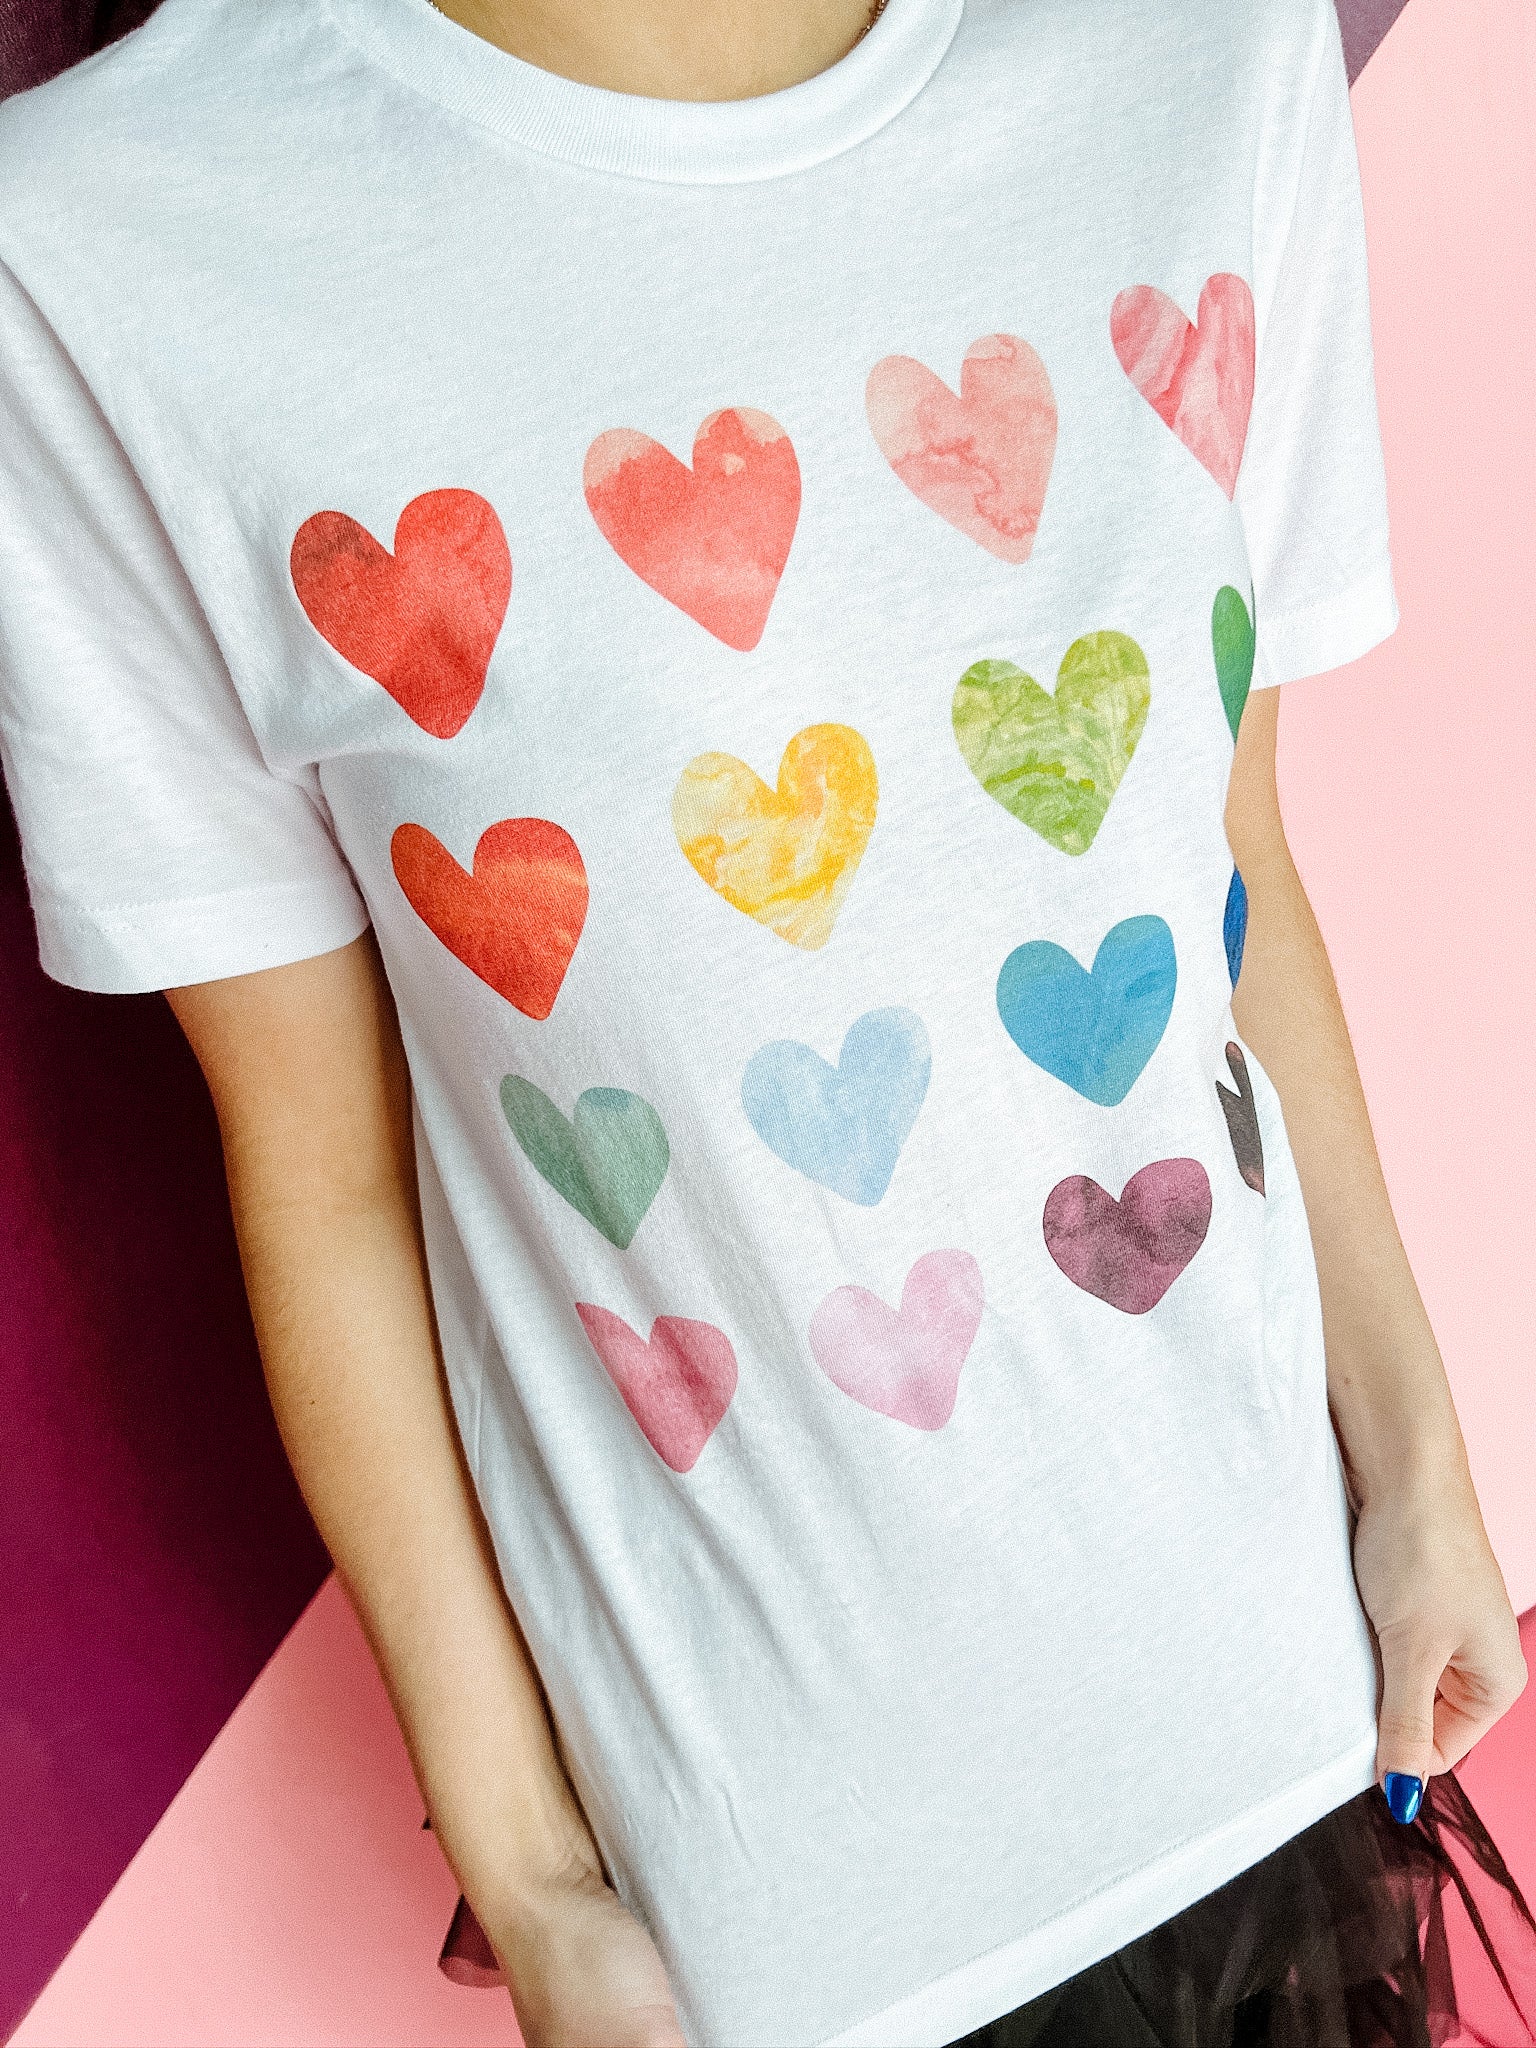 All the Heart Eyes Graphic Tee - White